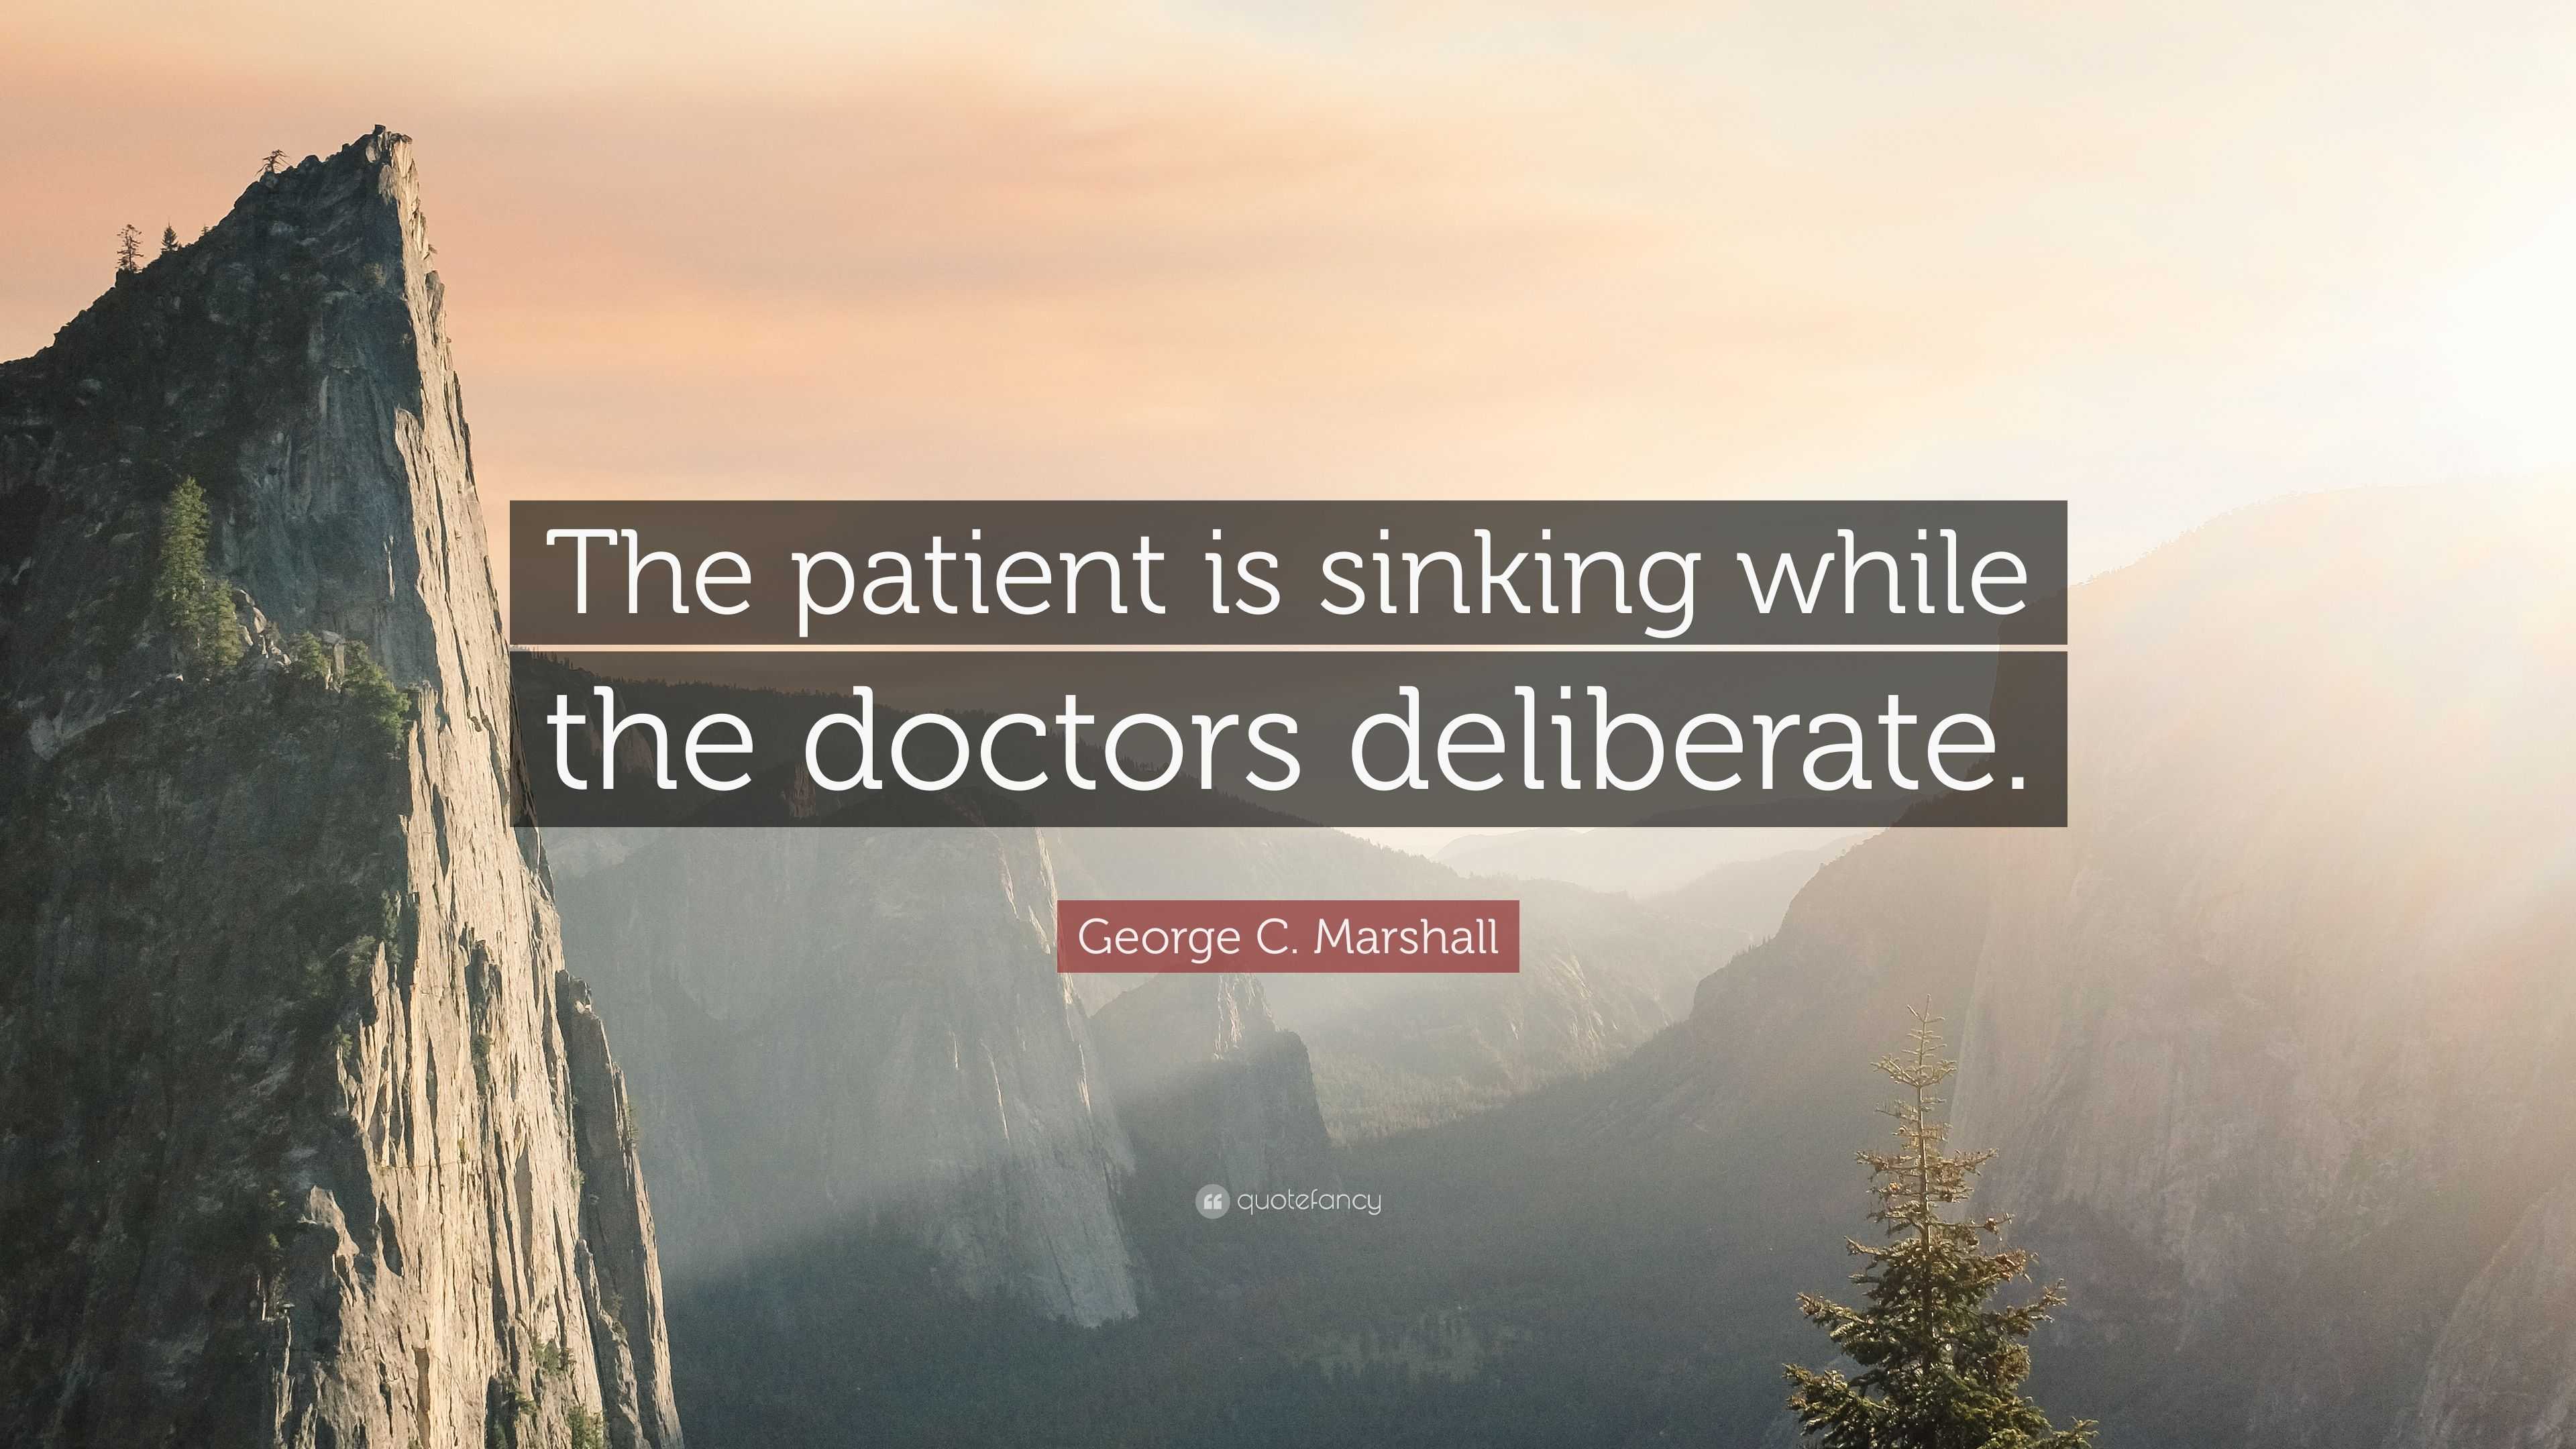 George C. Marshall Quote: "The patient is sinking while the doctors deliberate." (7 wallpapers ...